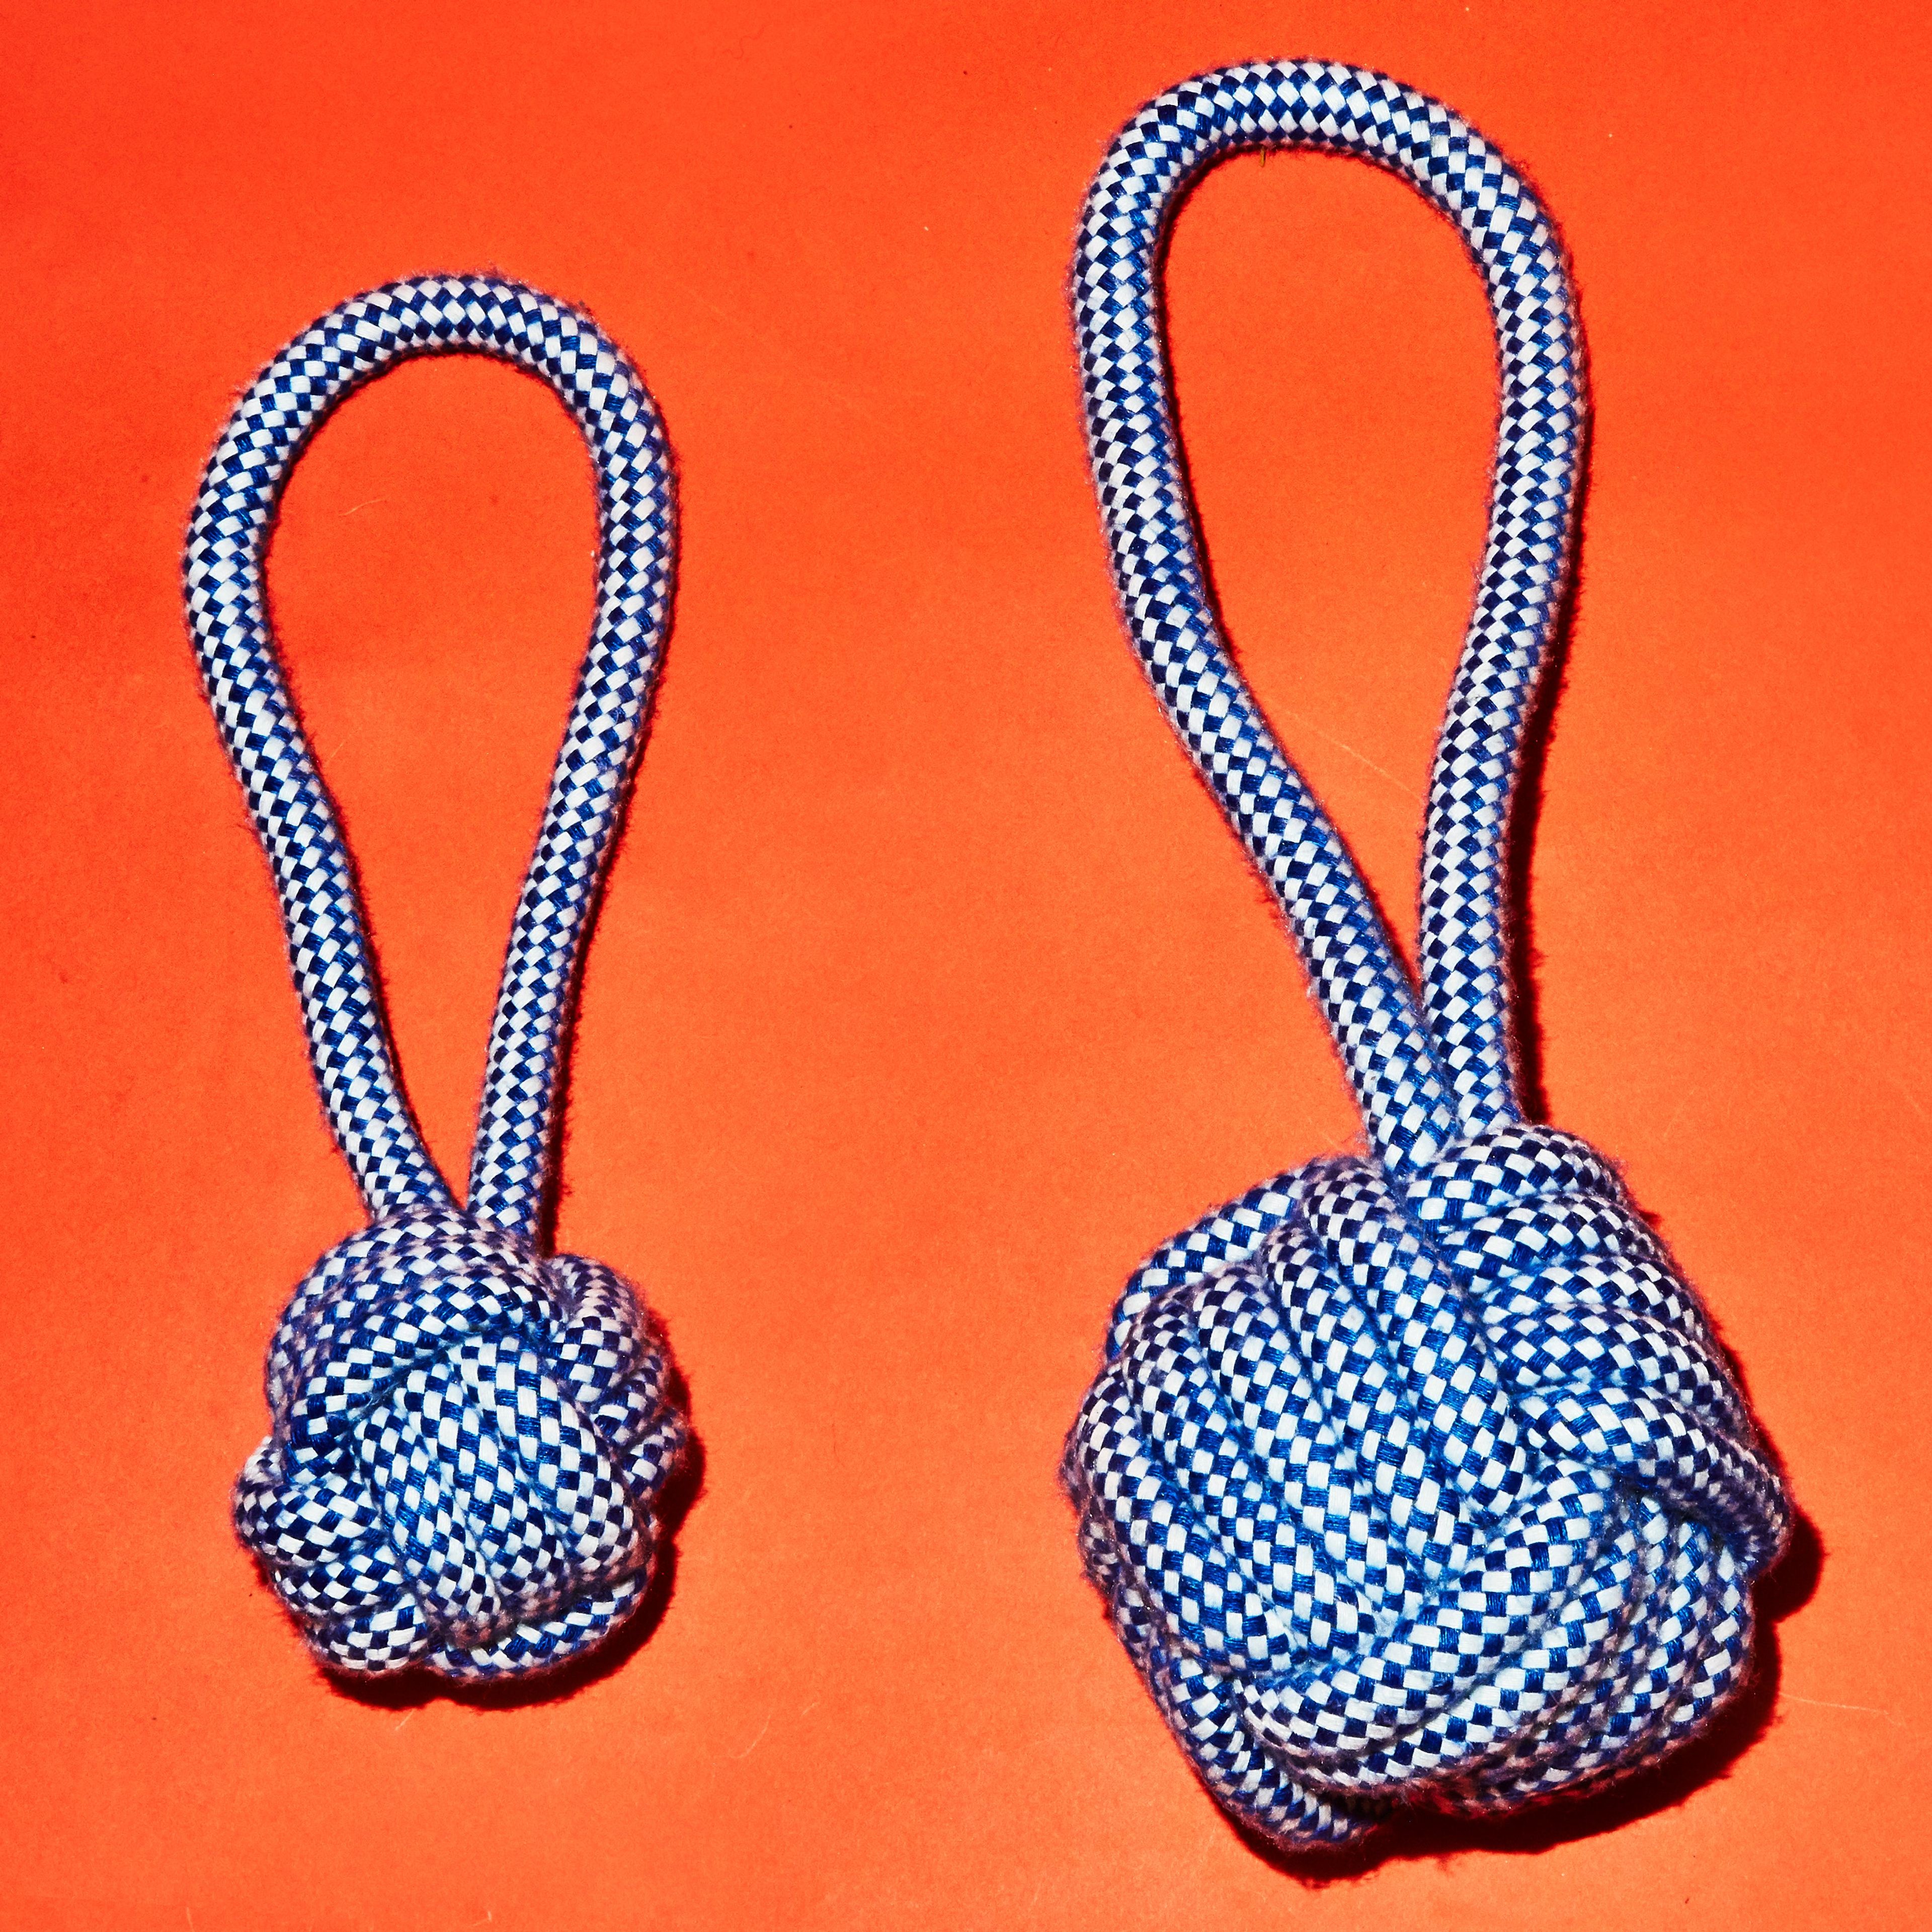 Rope Knot Toy / Royal Blue and White